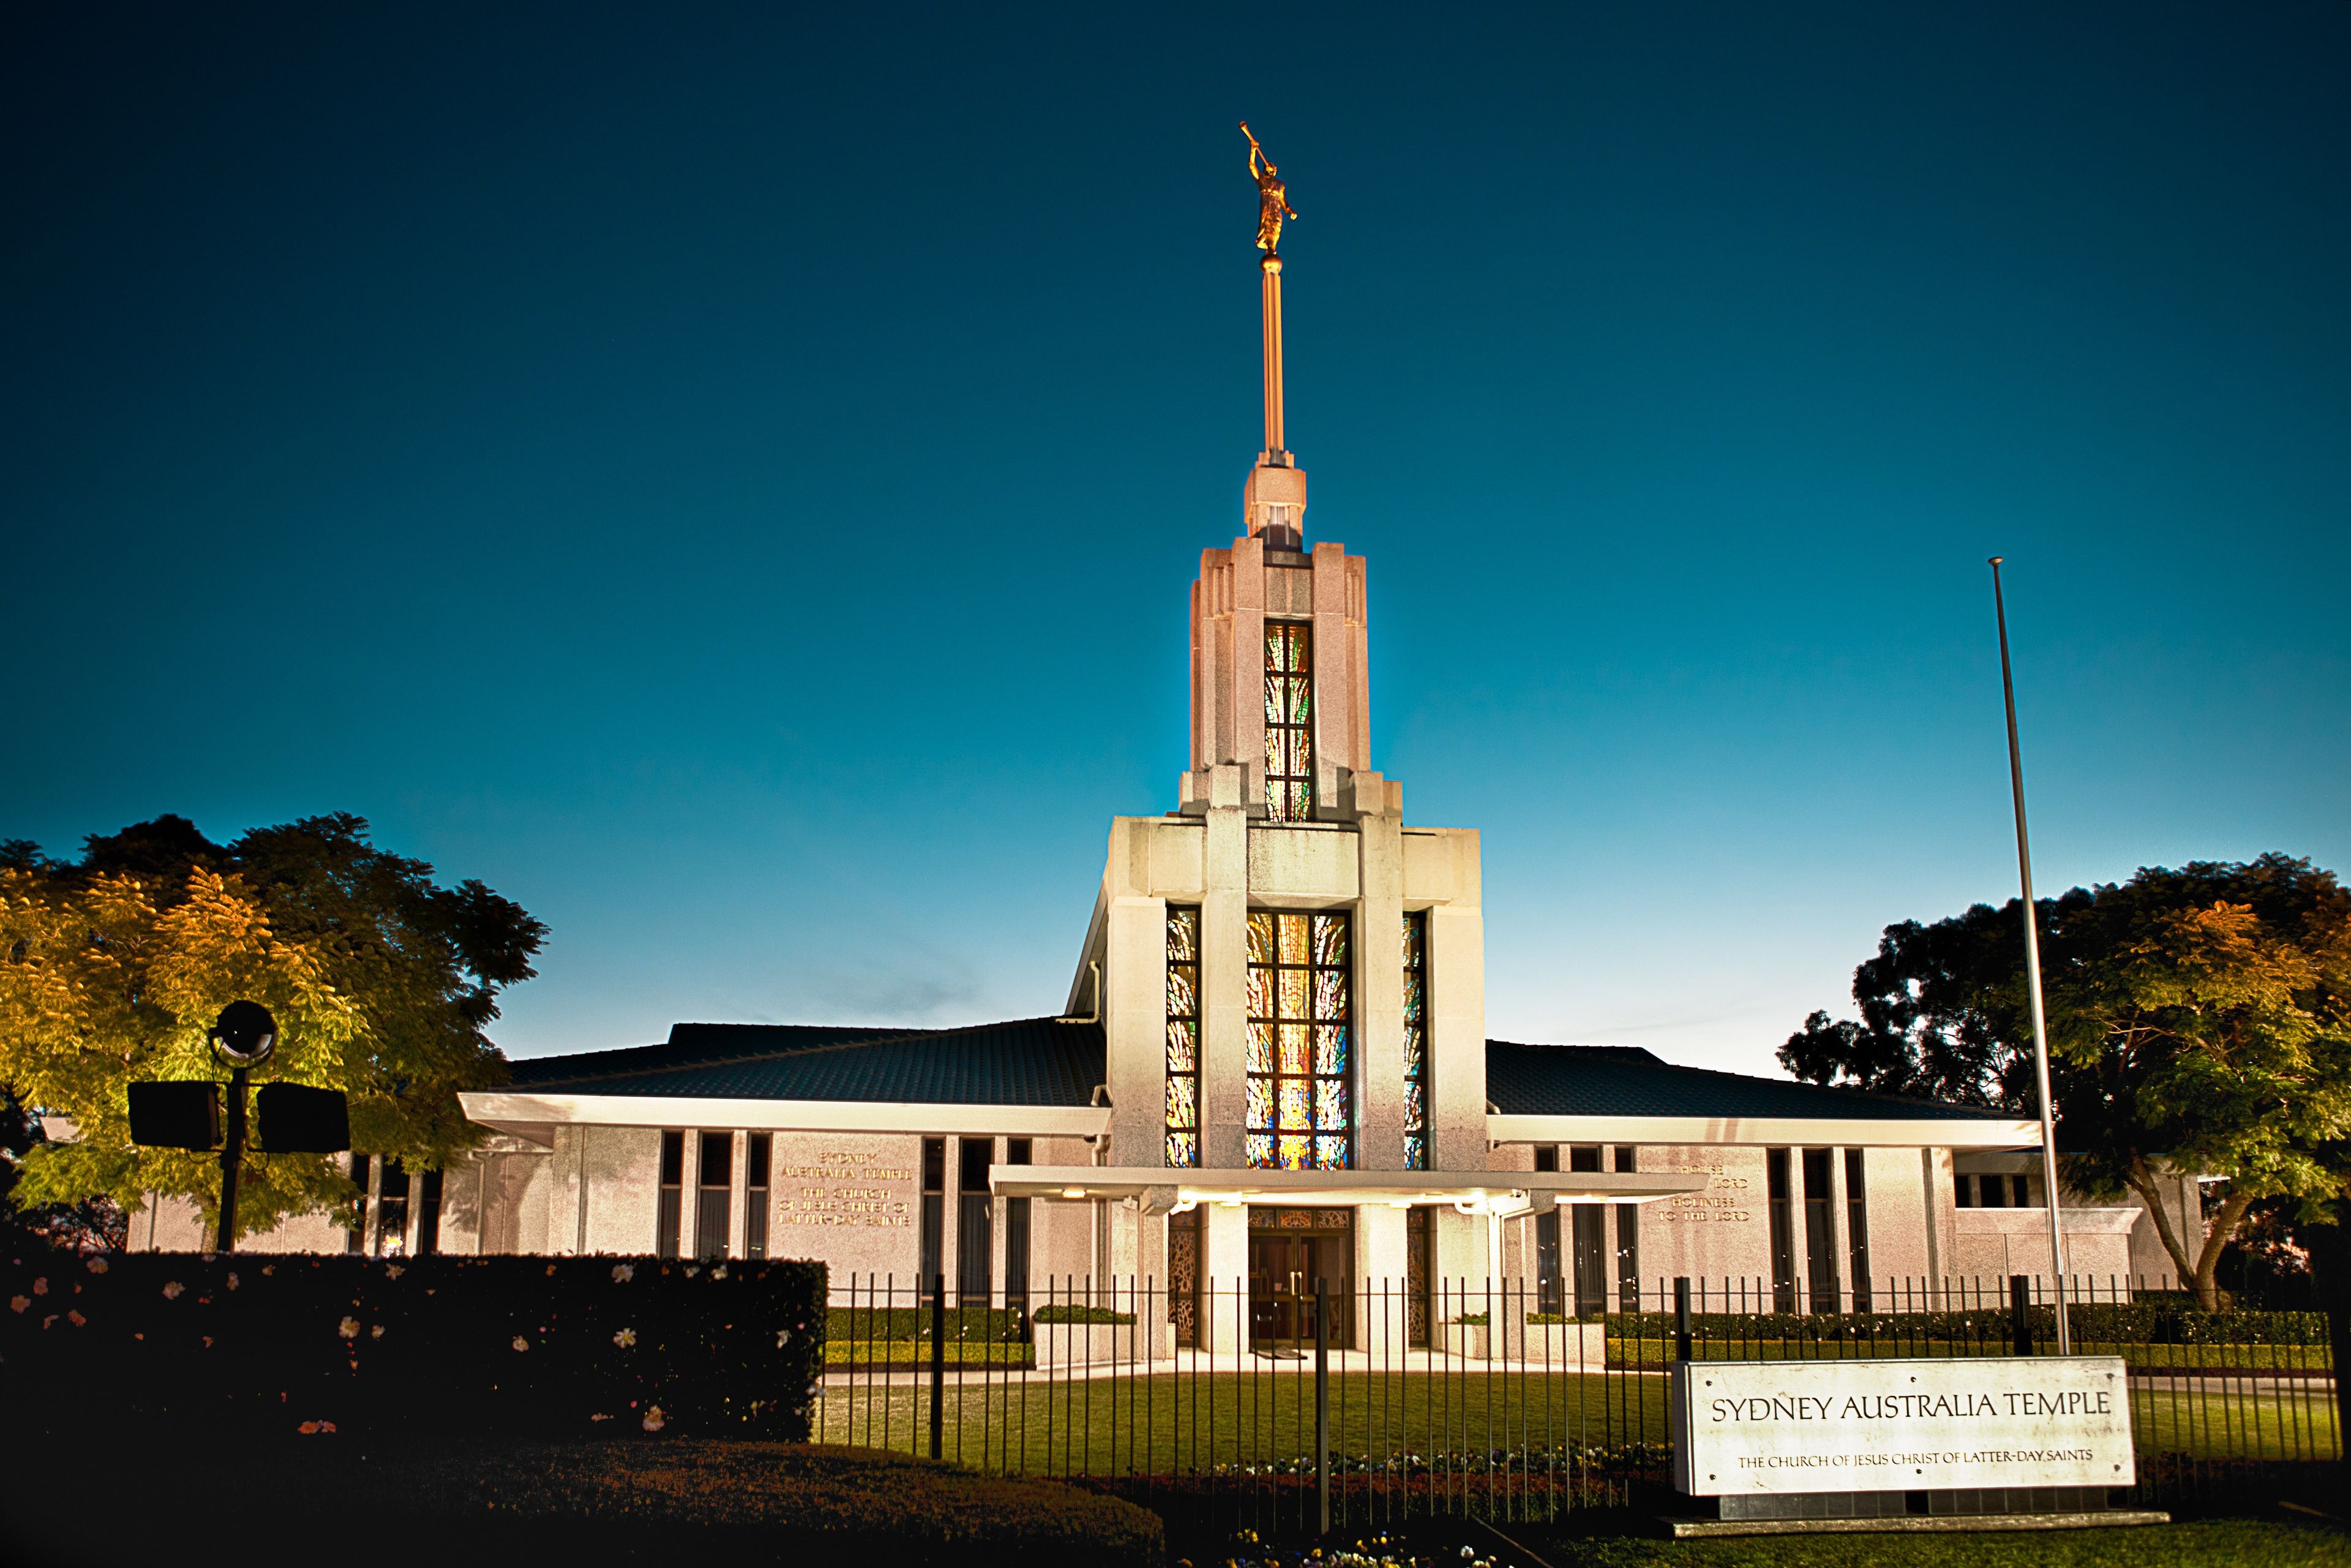 The Sydney Australia Temple and its entrance in the evening.